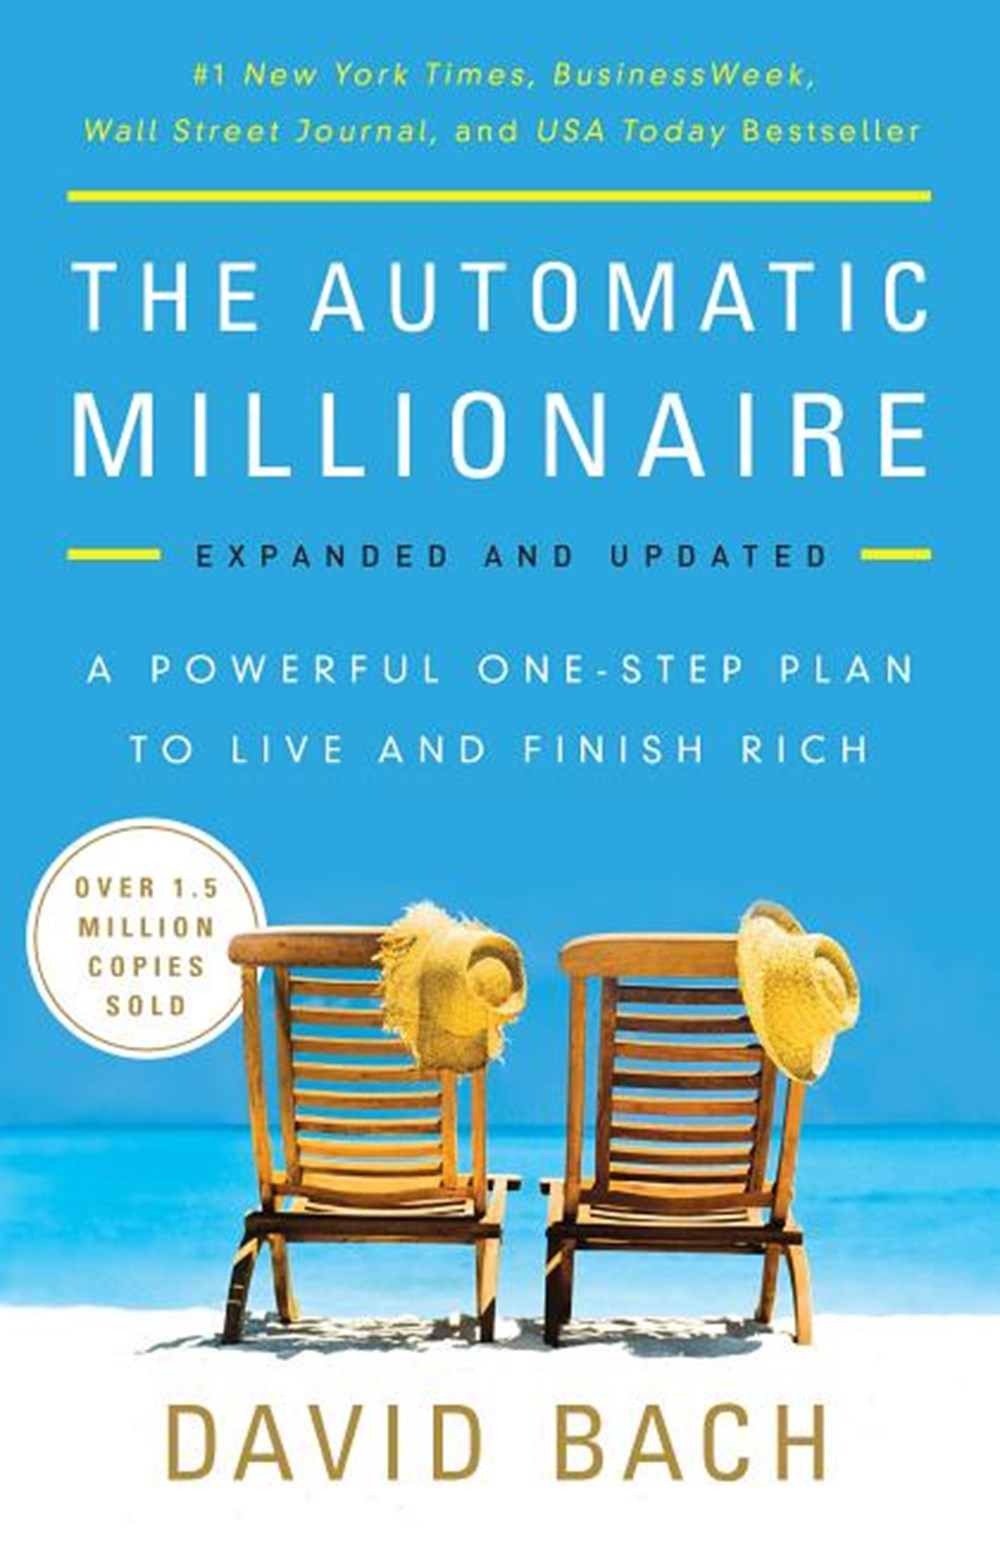 Automatic Millionaire: A Powerful One-Step Plan to Live and Finish Rich (Expanded, Updated)